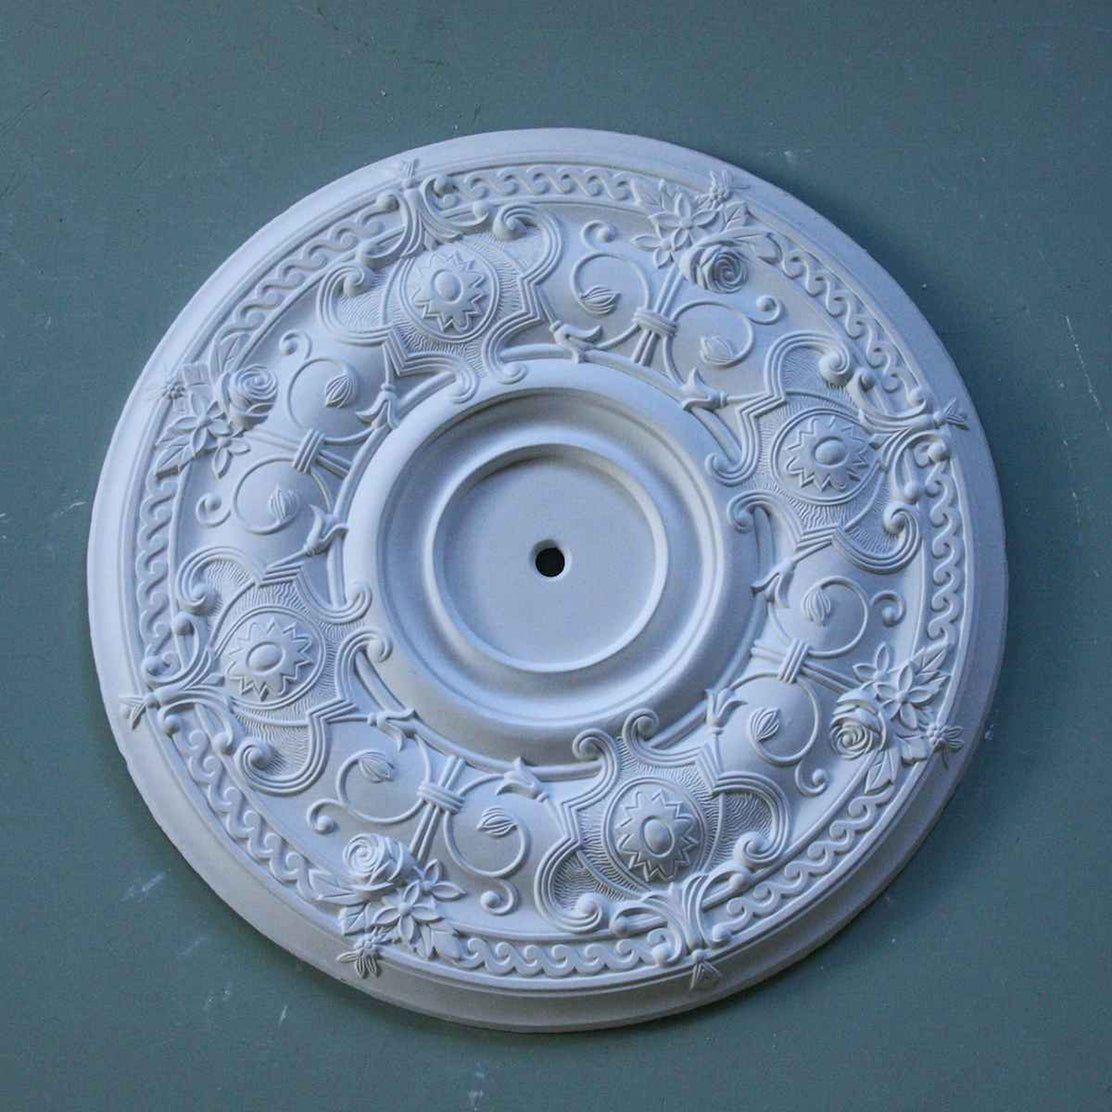 All You Need To Know About Ceiling Roses Sian Zeng